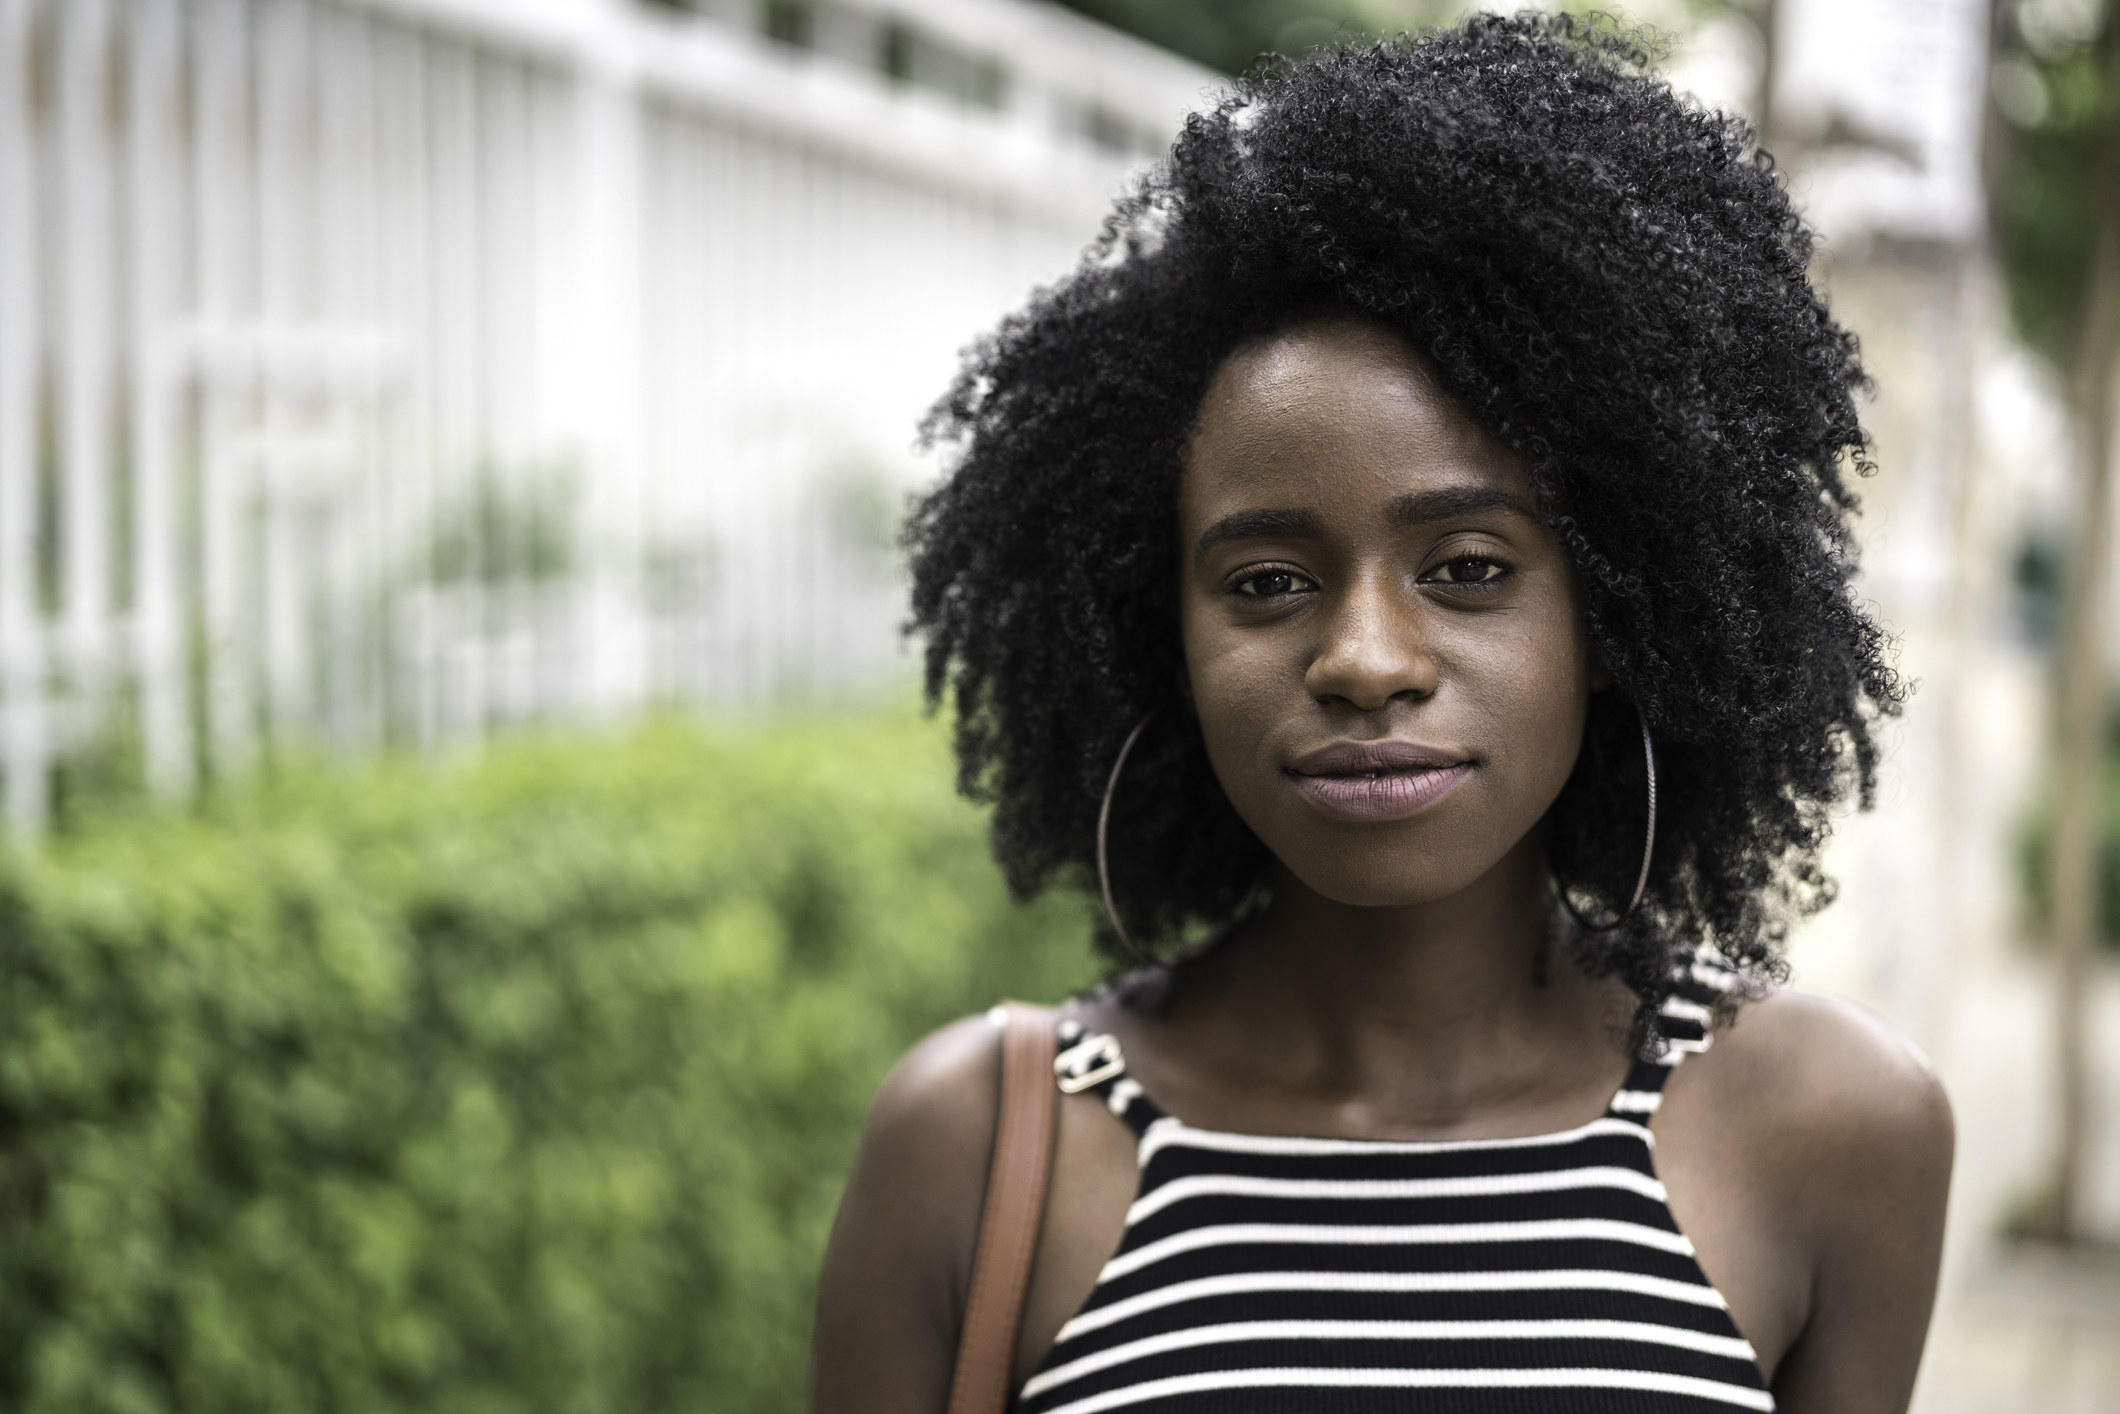 A Black female student with natural hair looks solemn